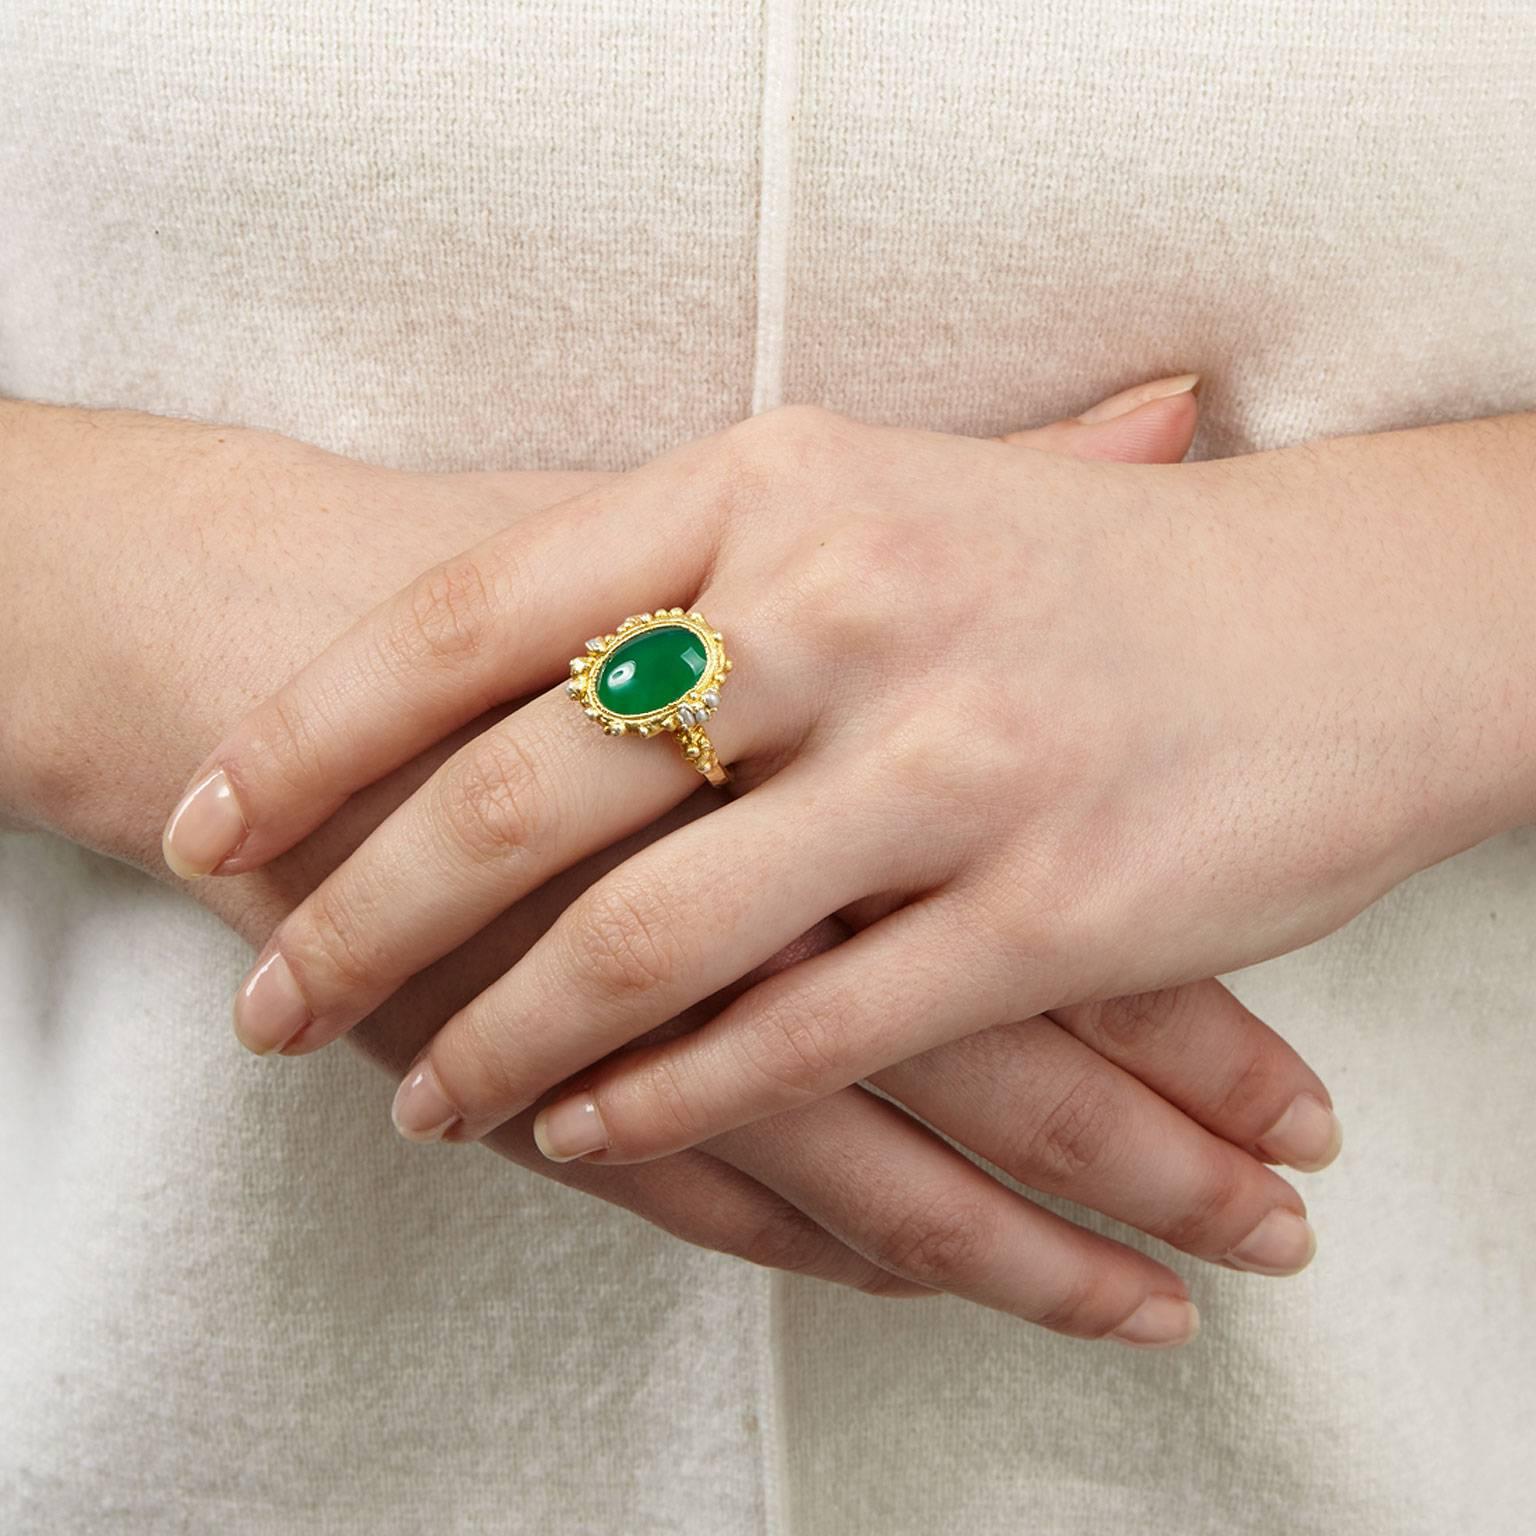 Be the envy of all your friends with the vivid Mayflower ring.
A forest-green agate stone sits at the centre, encrusted in golden granules and a scattering of seed pearls atop a hammered band. All in gold plated silver.
Bringing a touch of